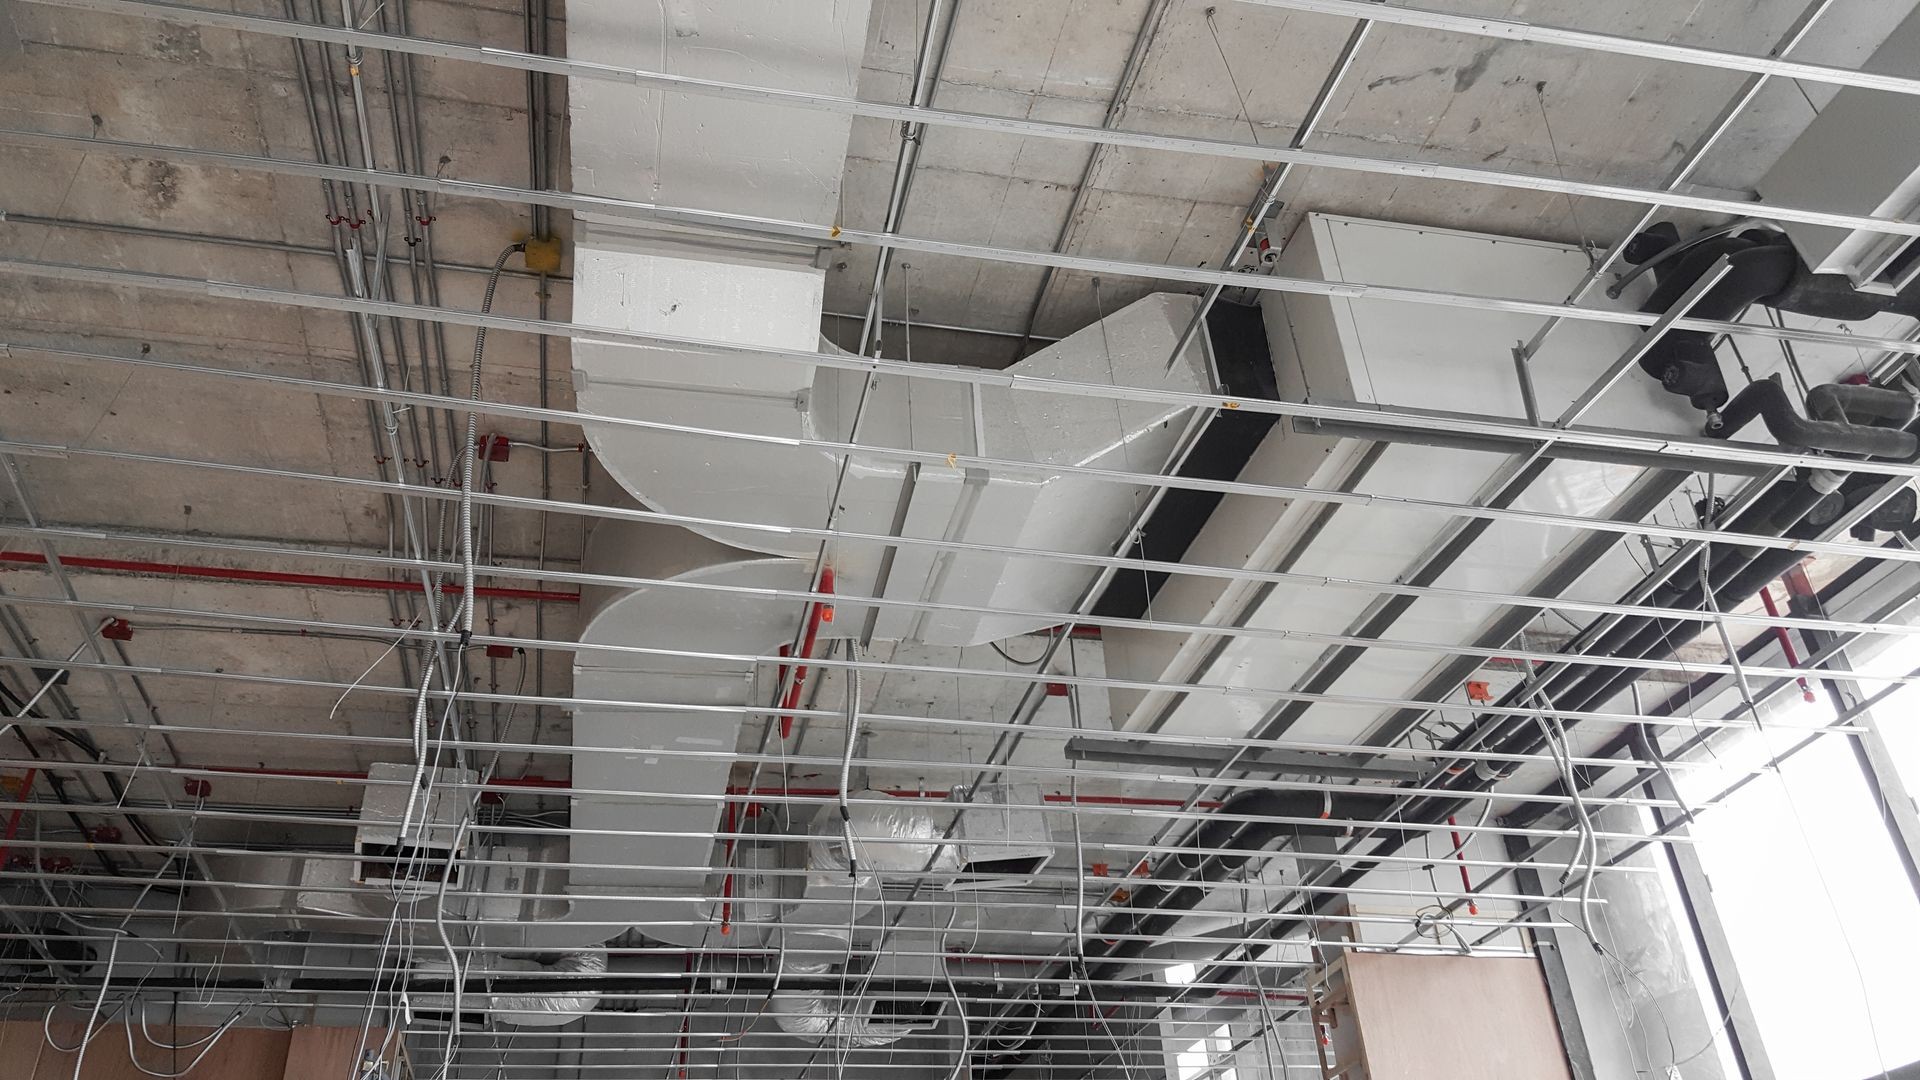 Air condition and hvac system installation under bareskin ceiling before interior finishing.